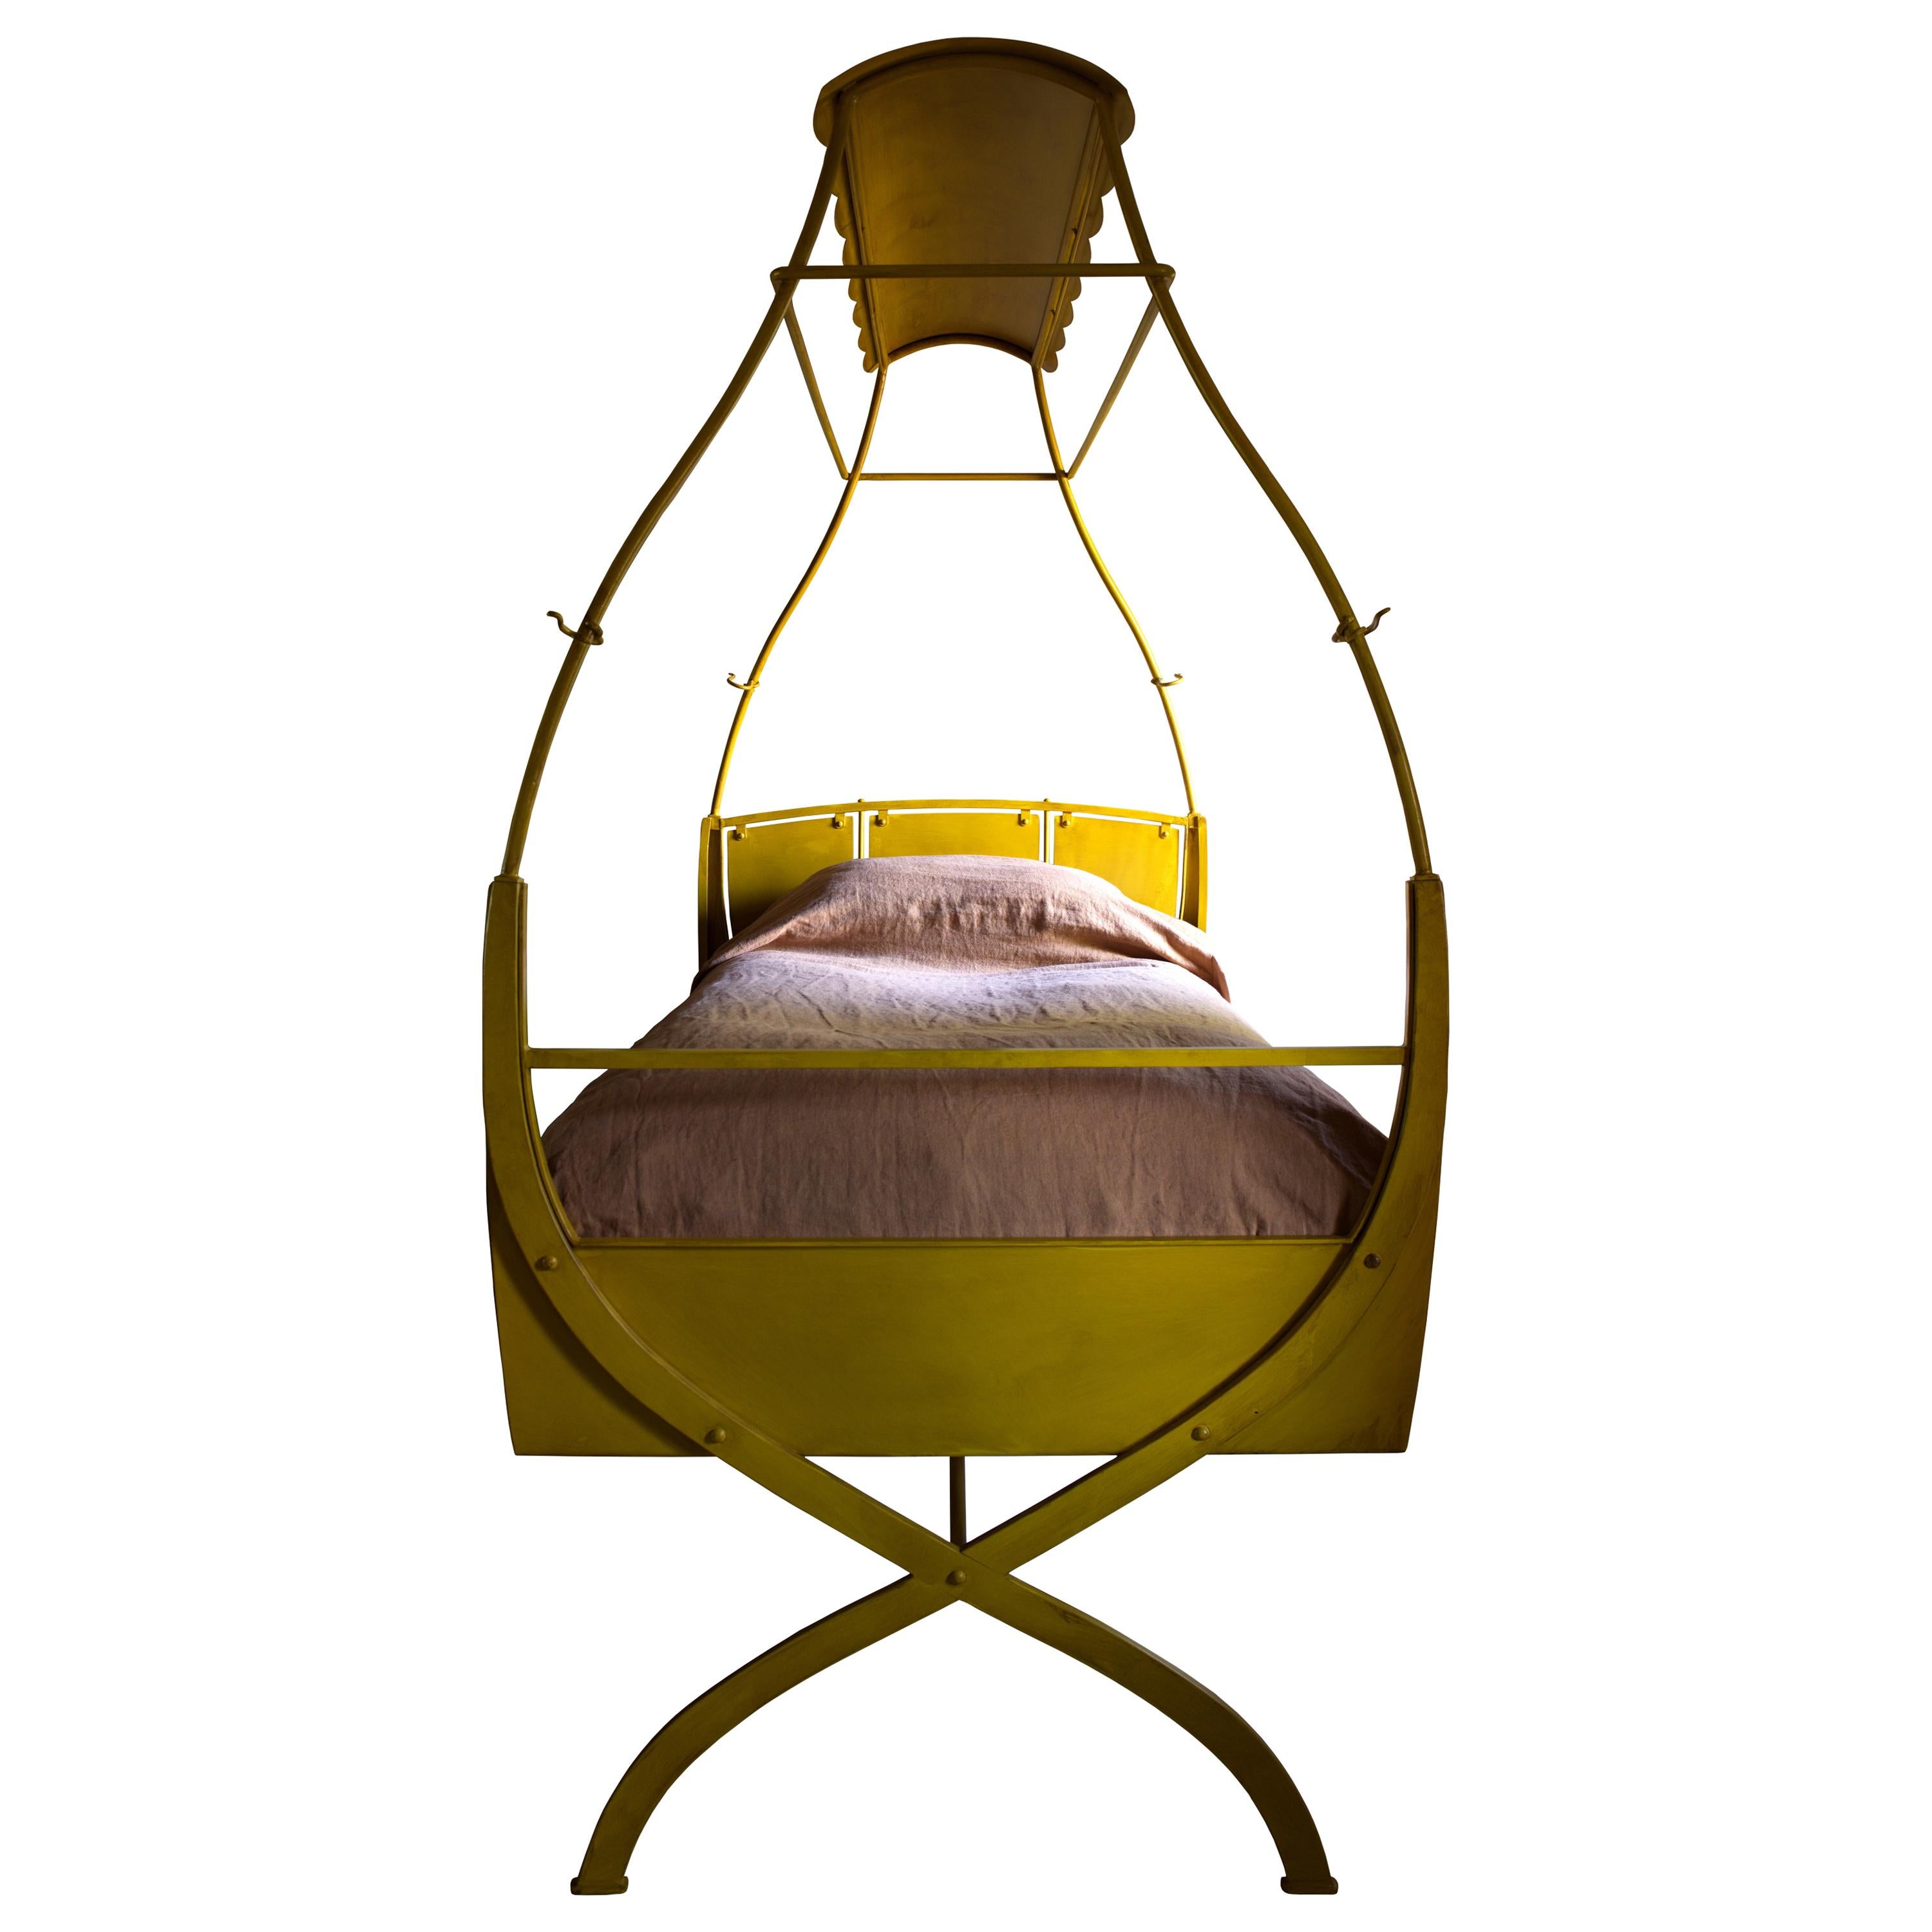 Canary Bed, Painted Steel X-Frame Bed, Part Fairground Ride and Part Swing For Sale